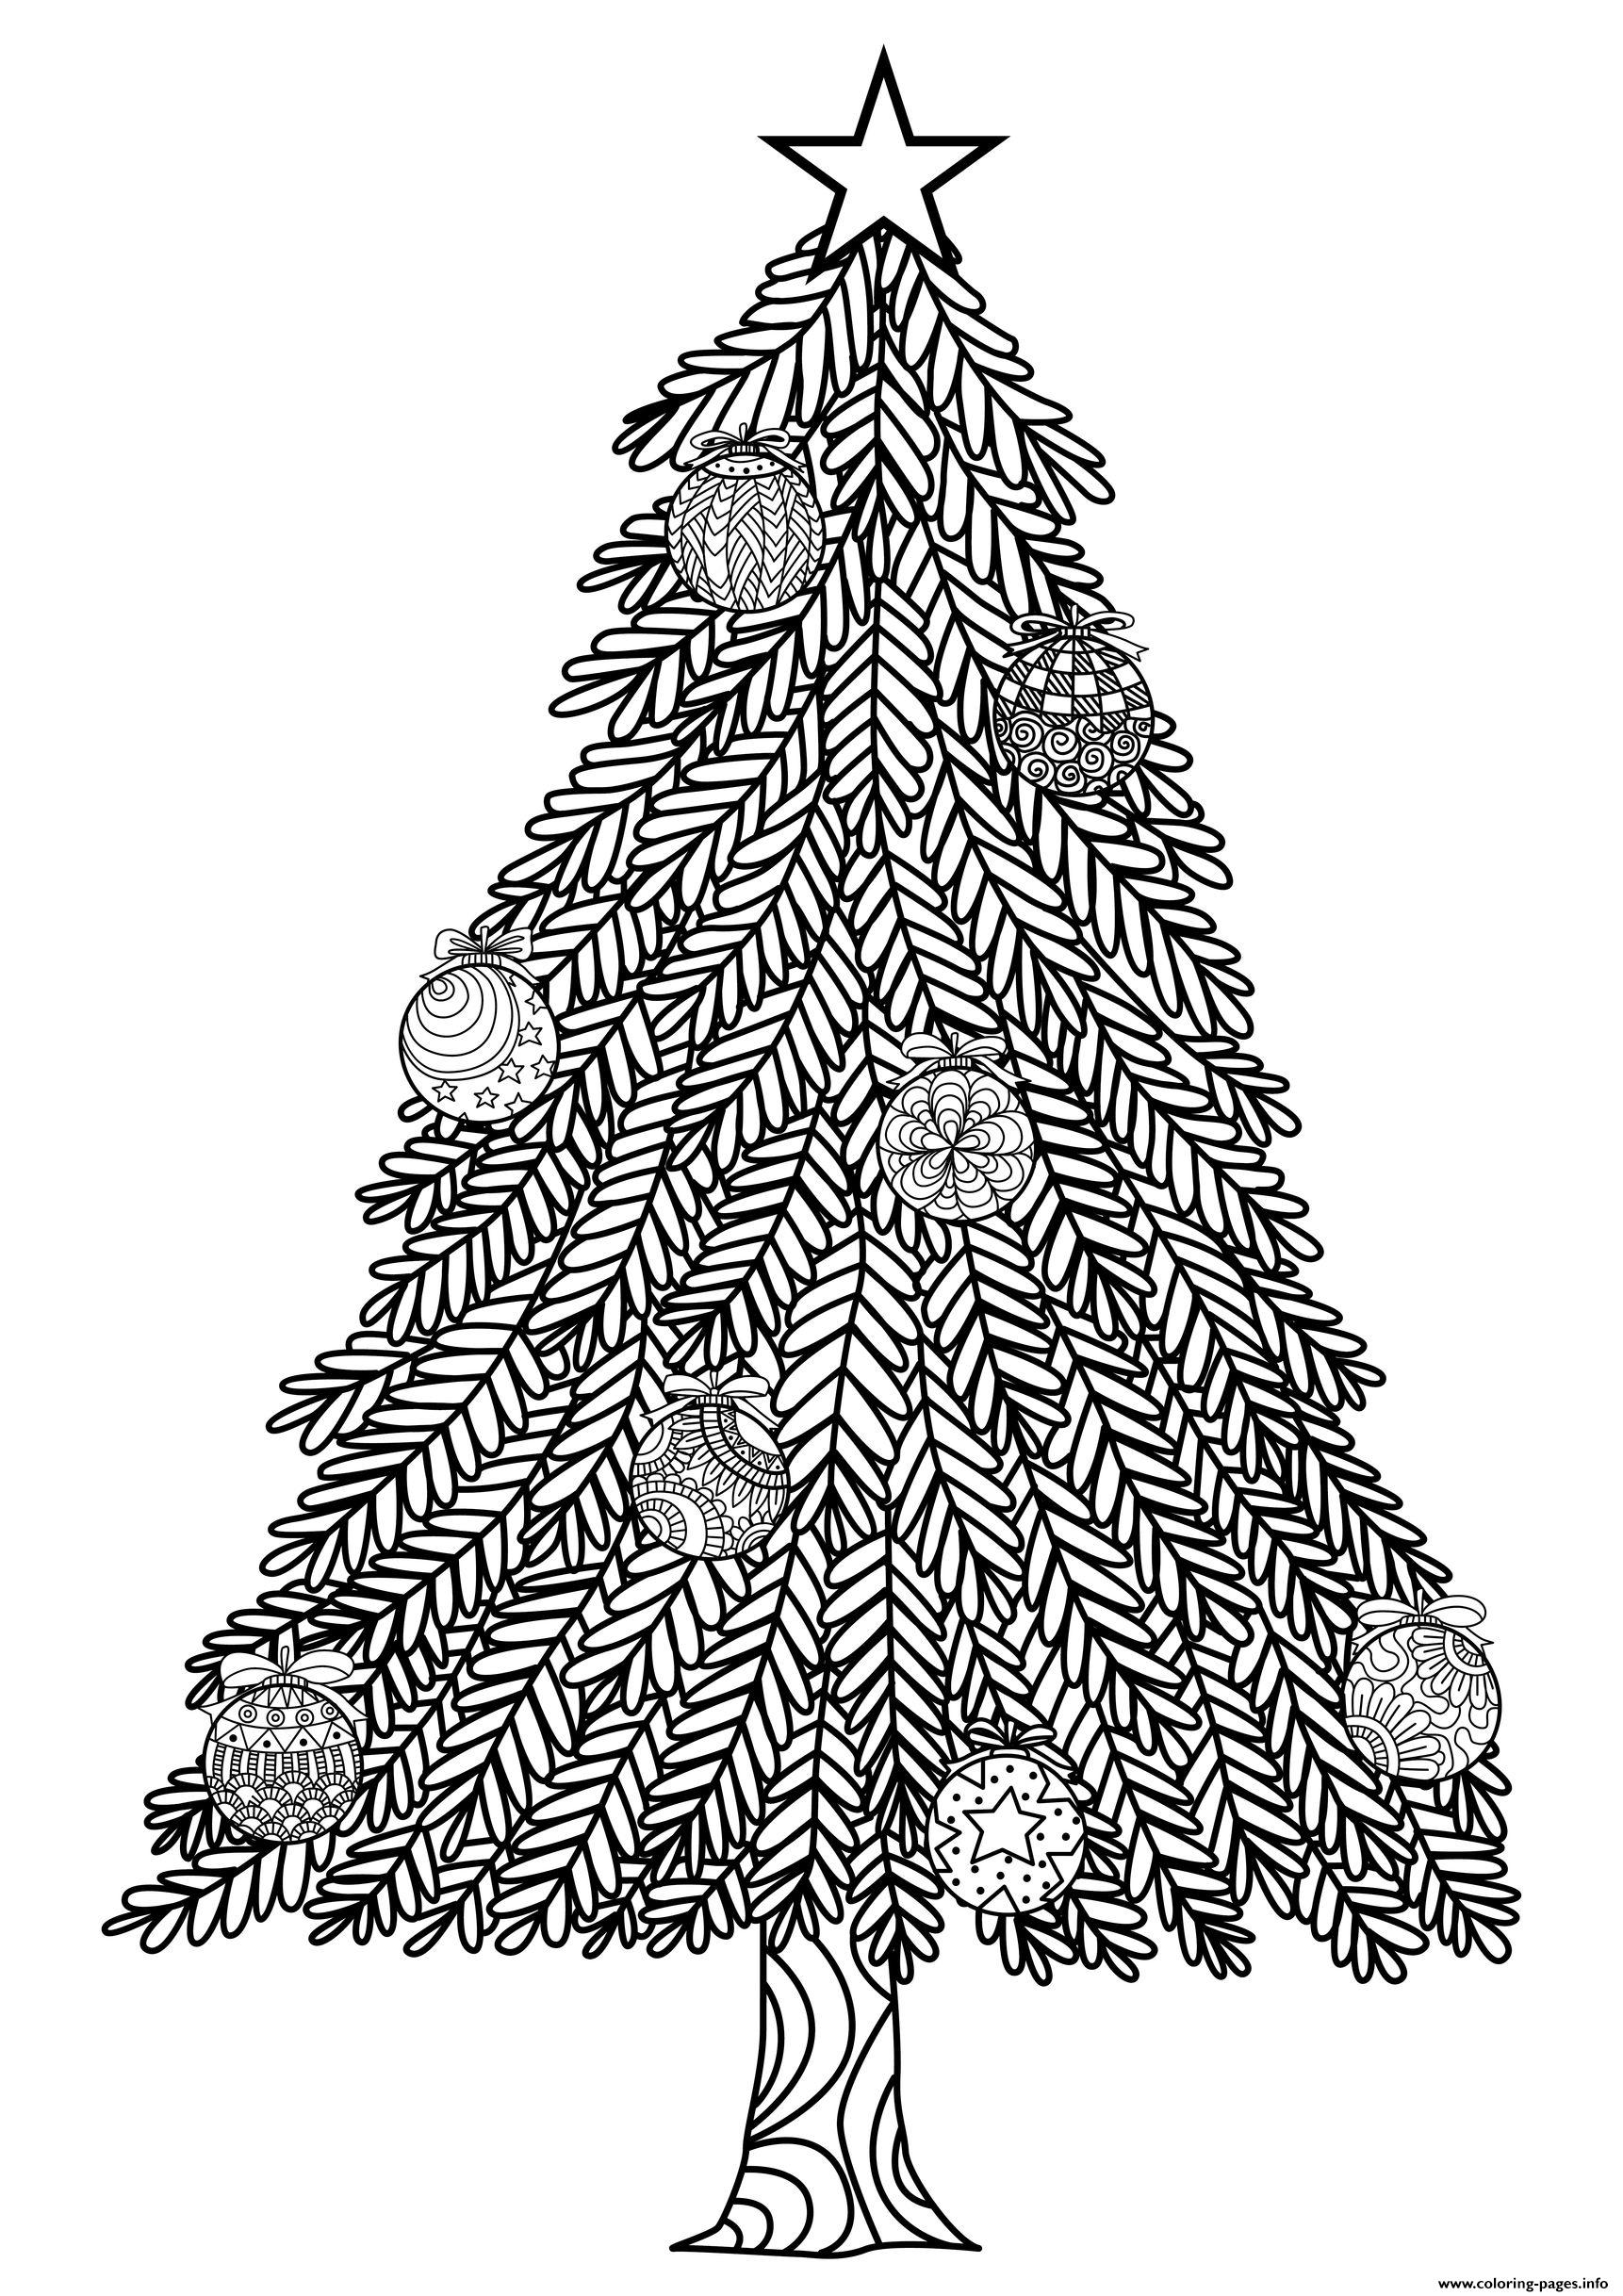 Adult Christmas Tree With Ball Ornaments By Bimdeedee coloring